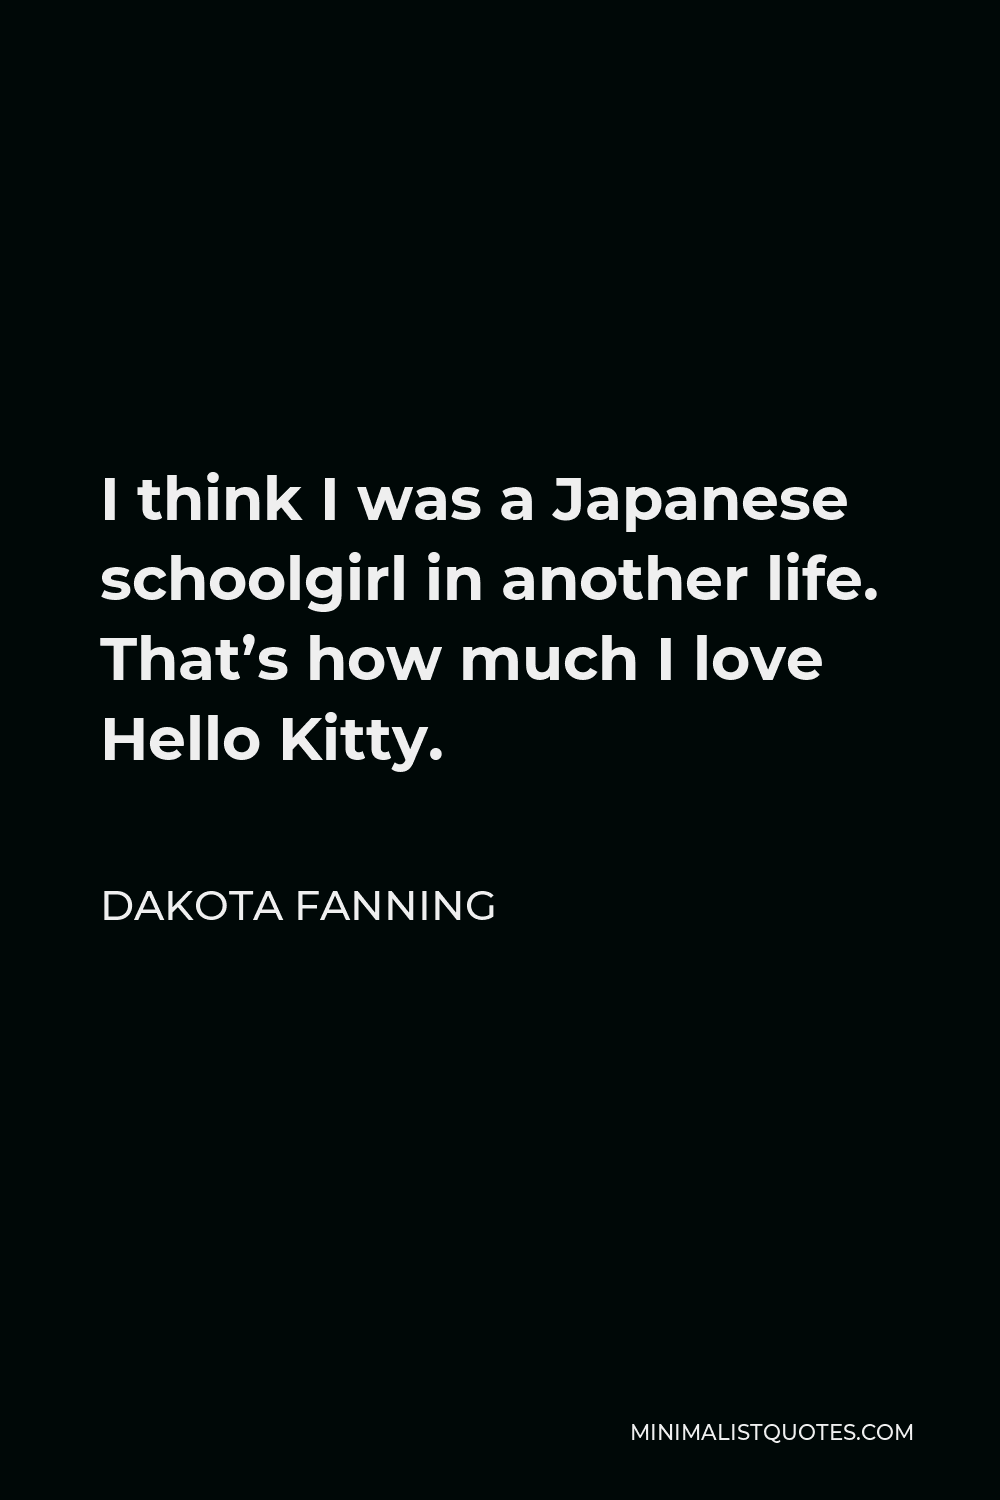 Dakota Fanning Quote - I think I was a Japanese schoolgirl in another life. That’s how much I love Hello Kitty.